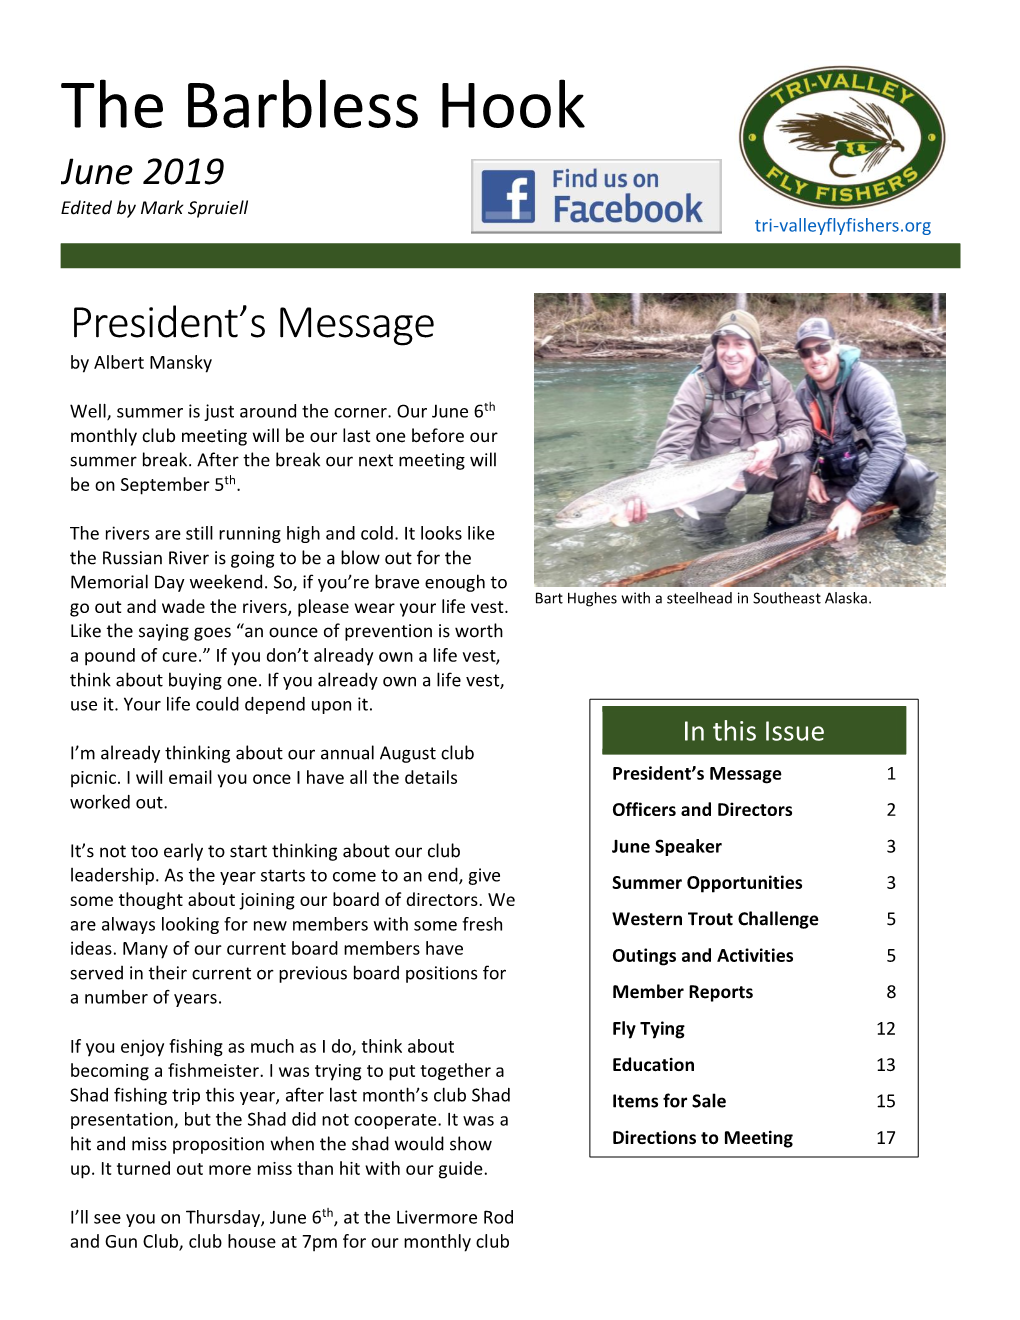 The Barbless Hook June 2019 Edited by Mark Spruiell Tri-Valleyflyfishers.Org